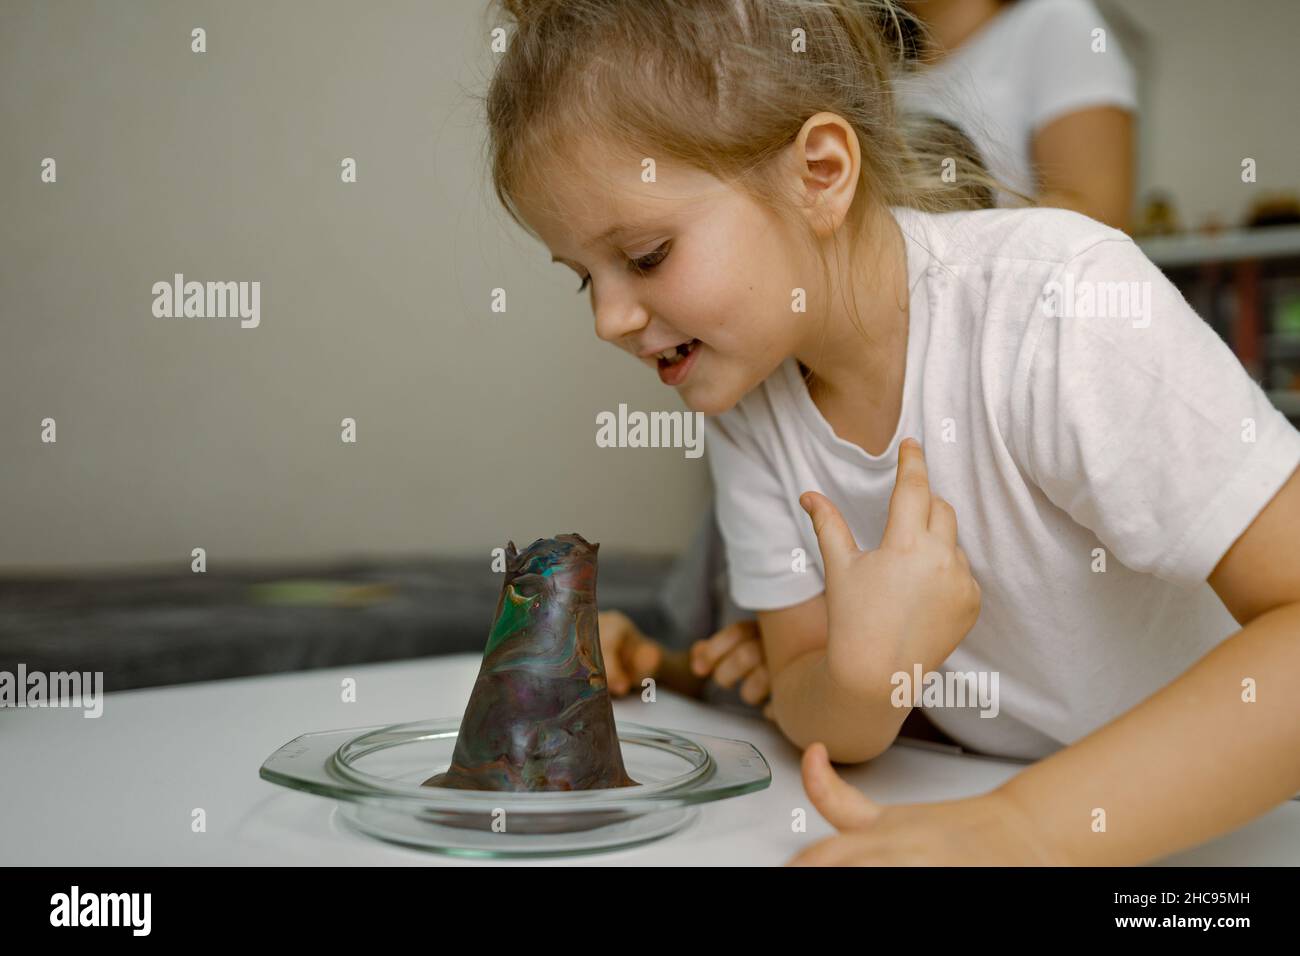 Child girl at home, looking into the mouth of plasticine volcano, curiosity Stock Photo